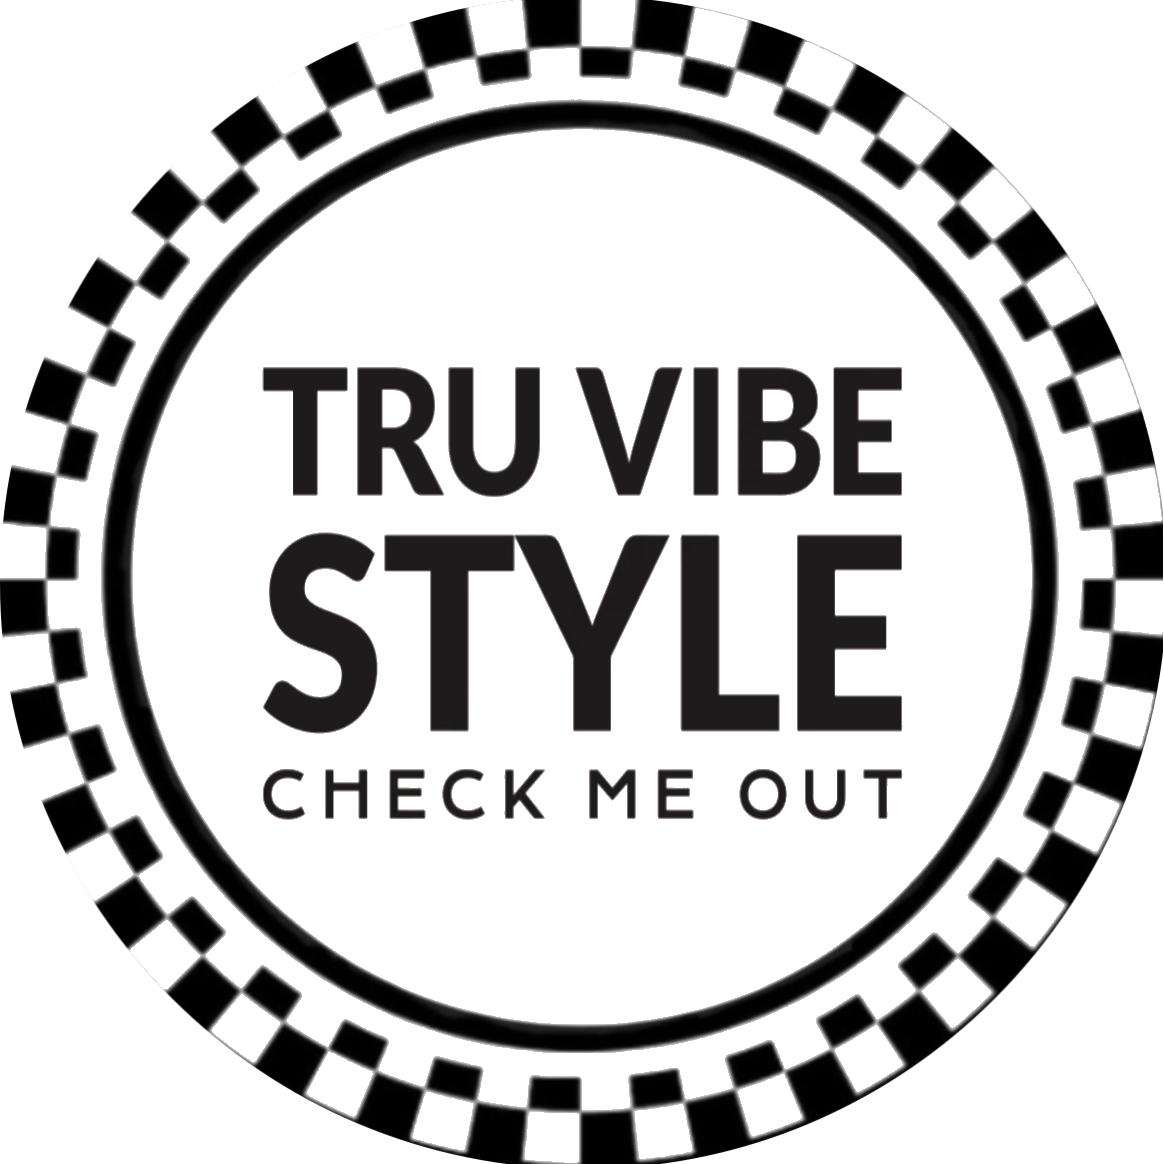 TruVibe Style 's images